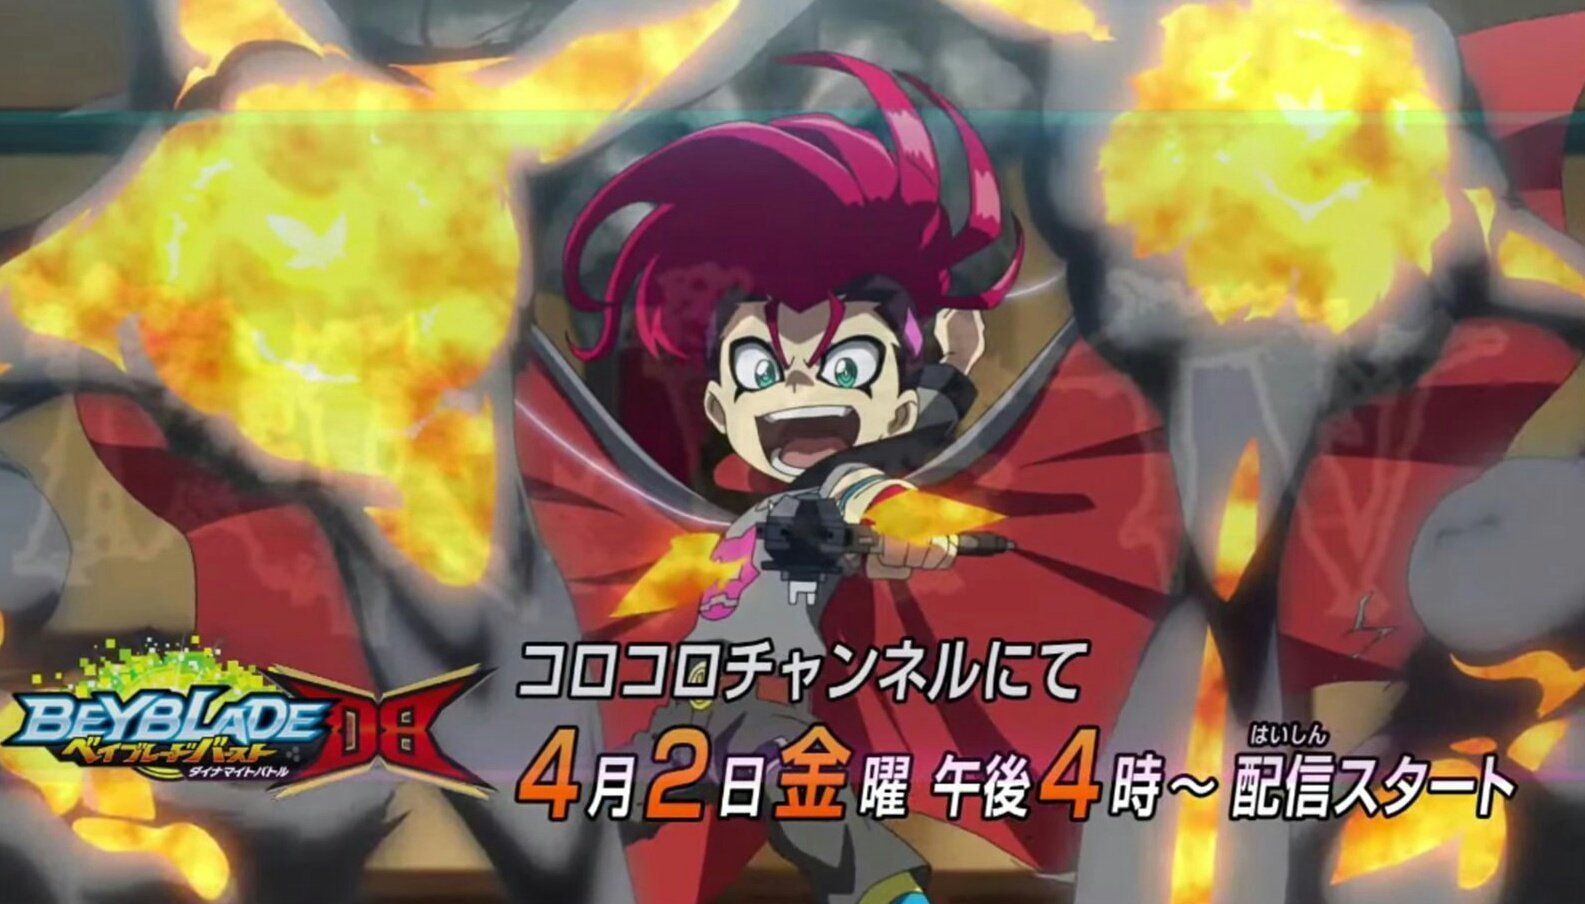 Picture From The Preview For Season 6 Dynamite Battle, Which Shows The New Protagonist, Bell Daikokuten.He Looks Lik In 2021. Beyblade Burst, Beyblade Characters, Skeletor